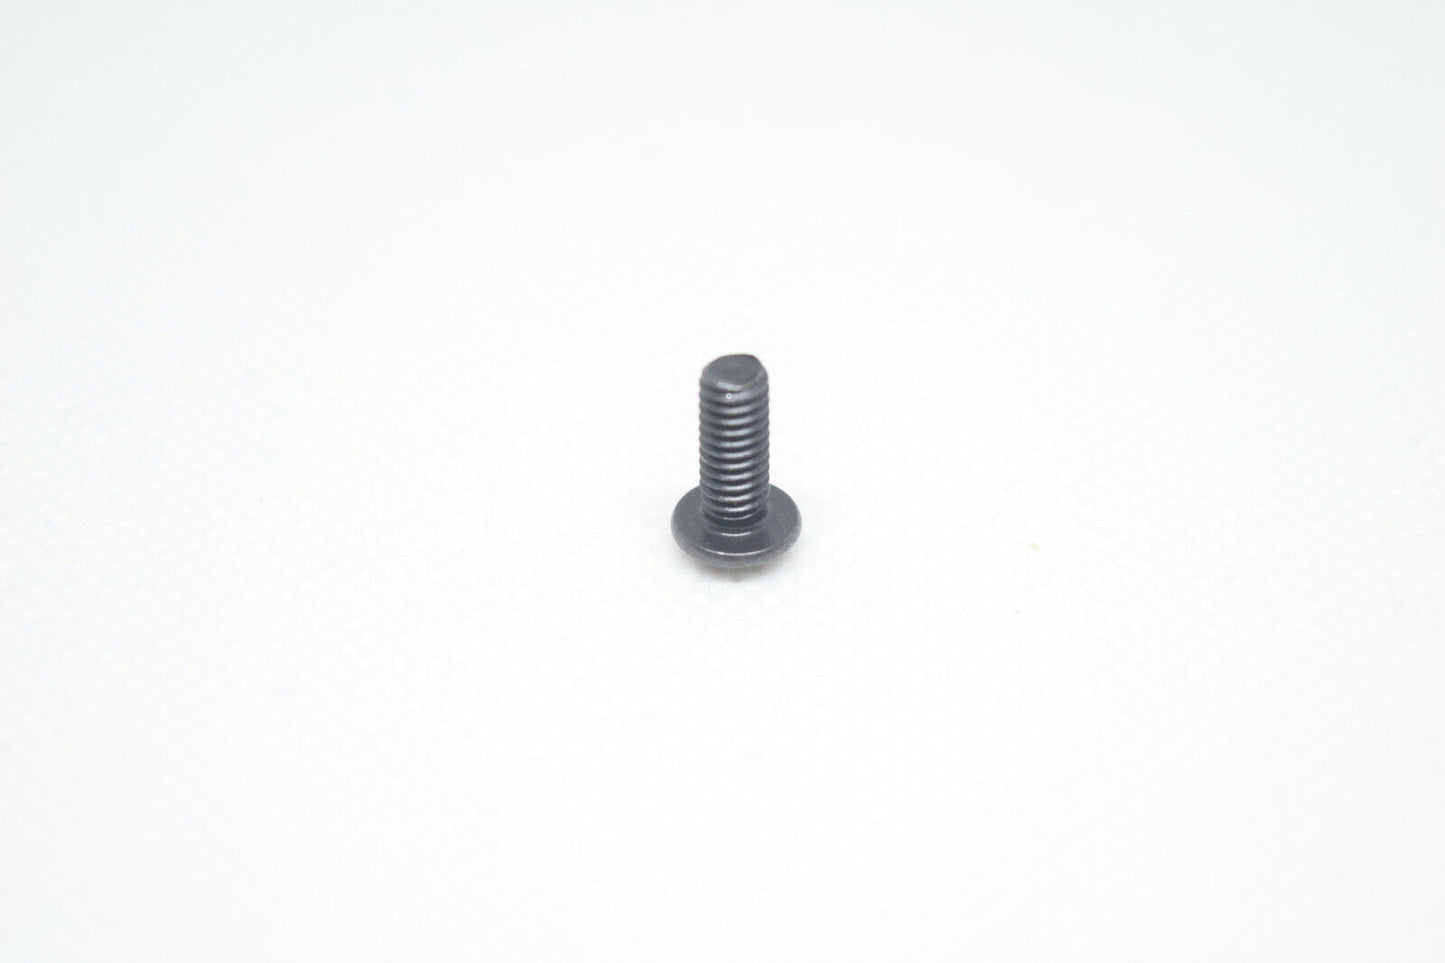 Crosman Hex Head Frame Screw Kit for 1322, 2240, 2250, 1377, and others